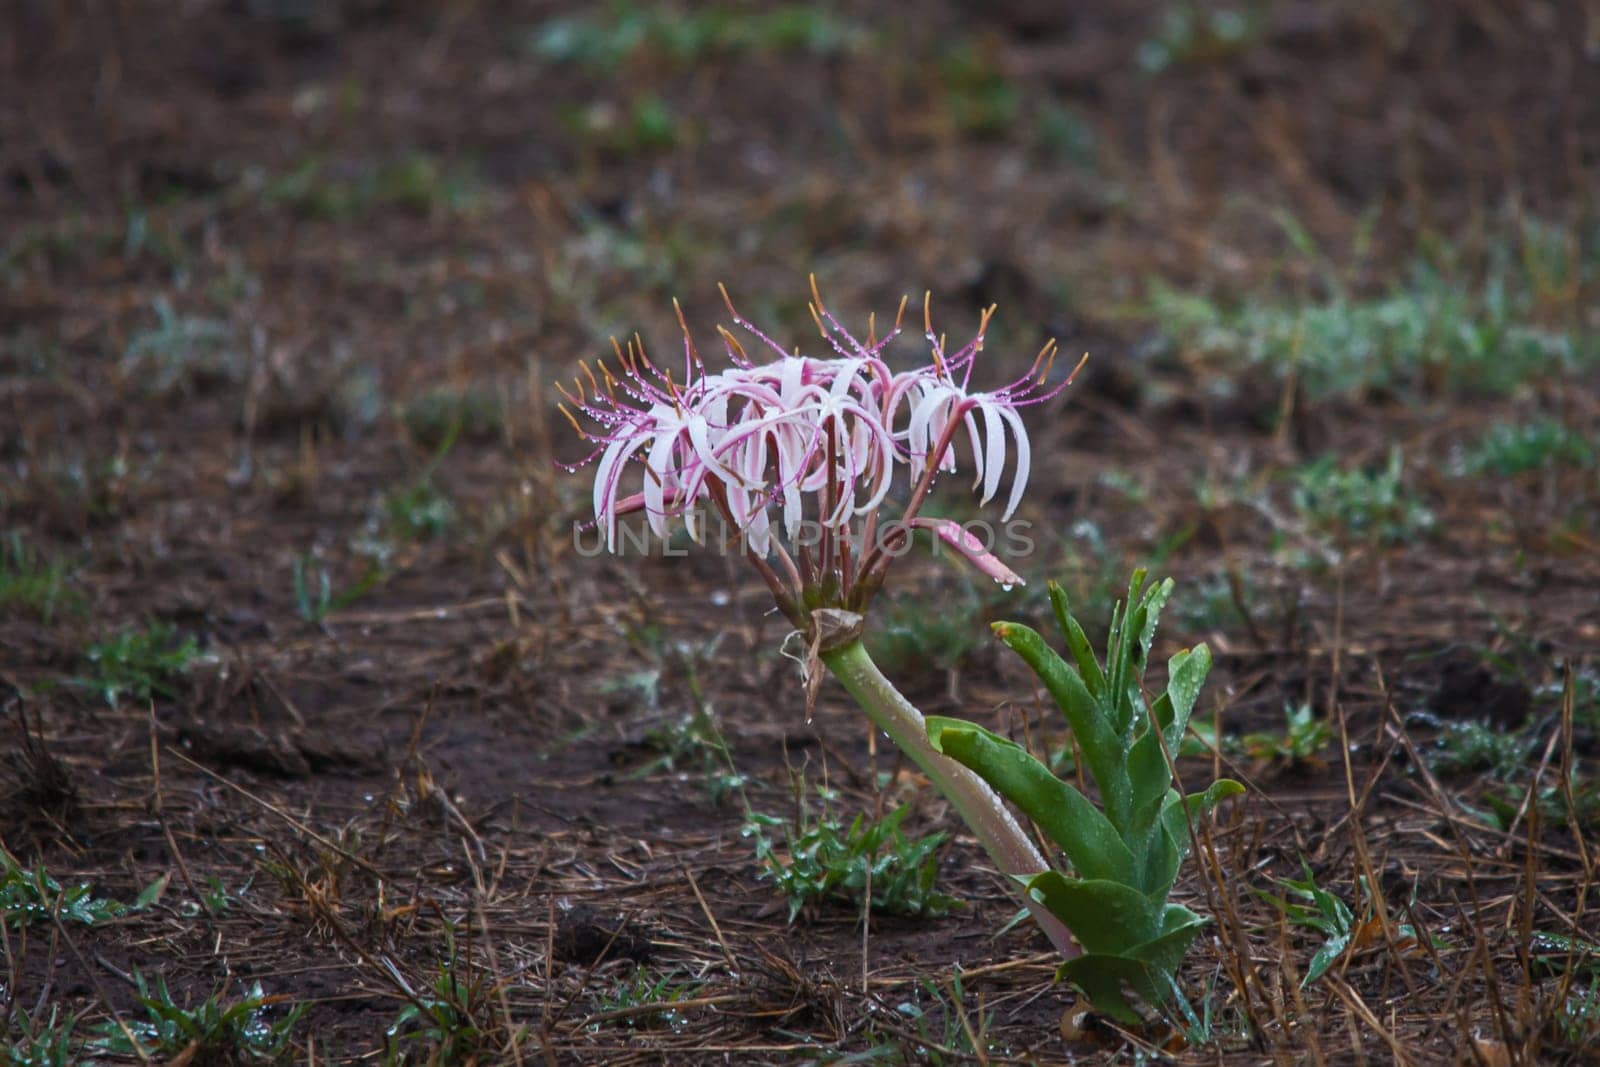 Sand Lily (Crinum buphanoides) 15120 by kobus_peche